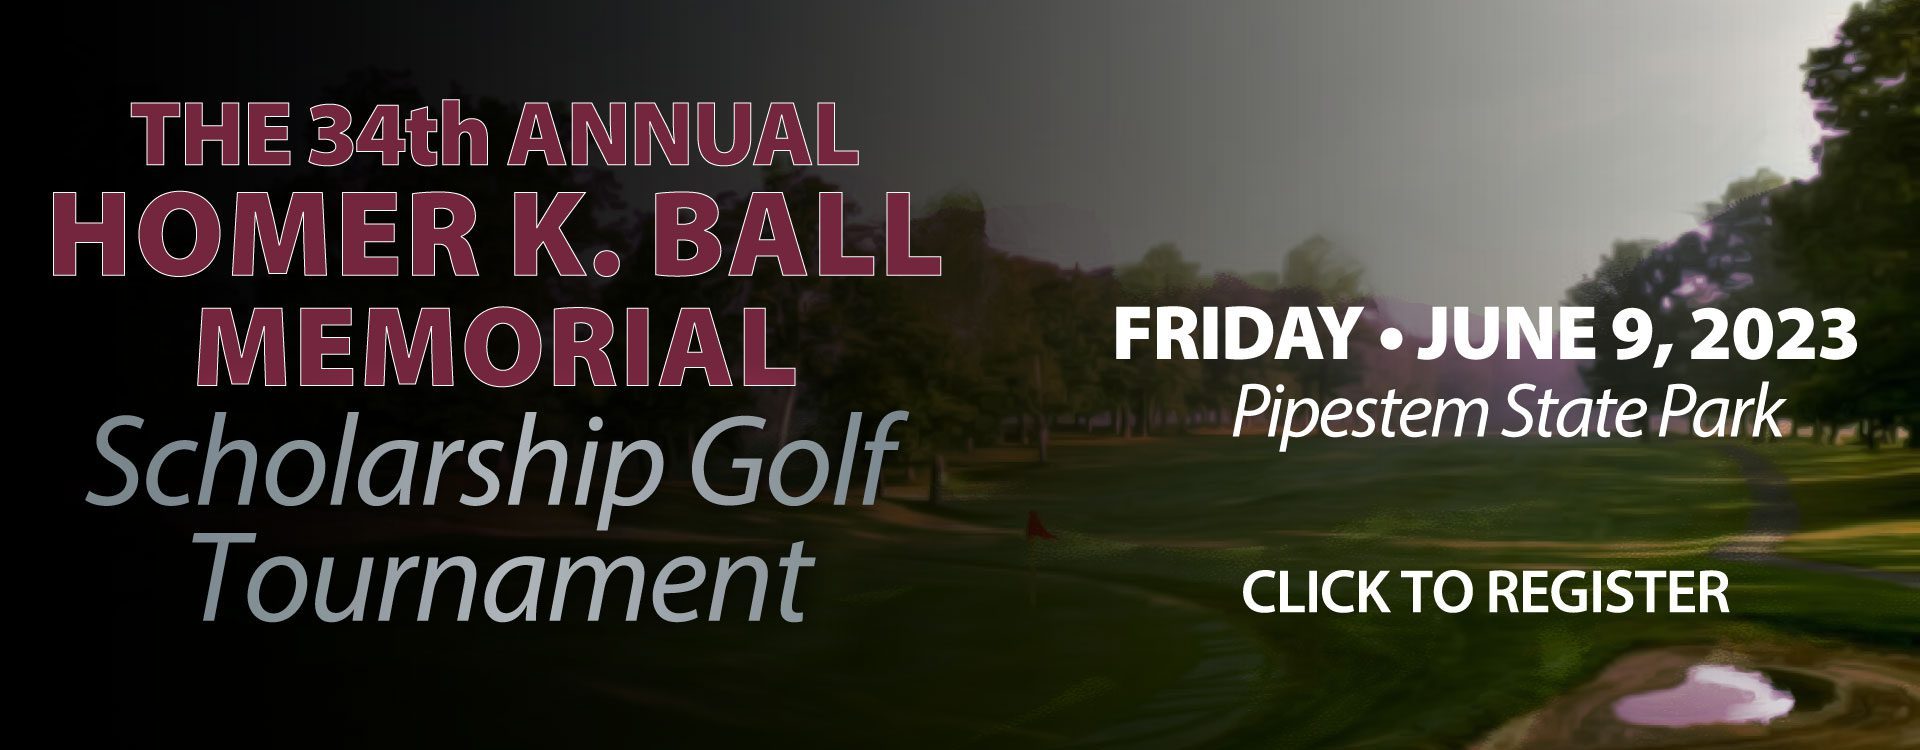 The 34th Annual Homer K. Ball Memorial Scholarship Golf Tournament will be held on Friday, June 9, 2023 at Pipestem State Park. Click here to register!